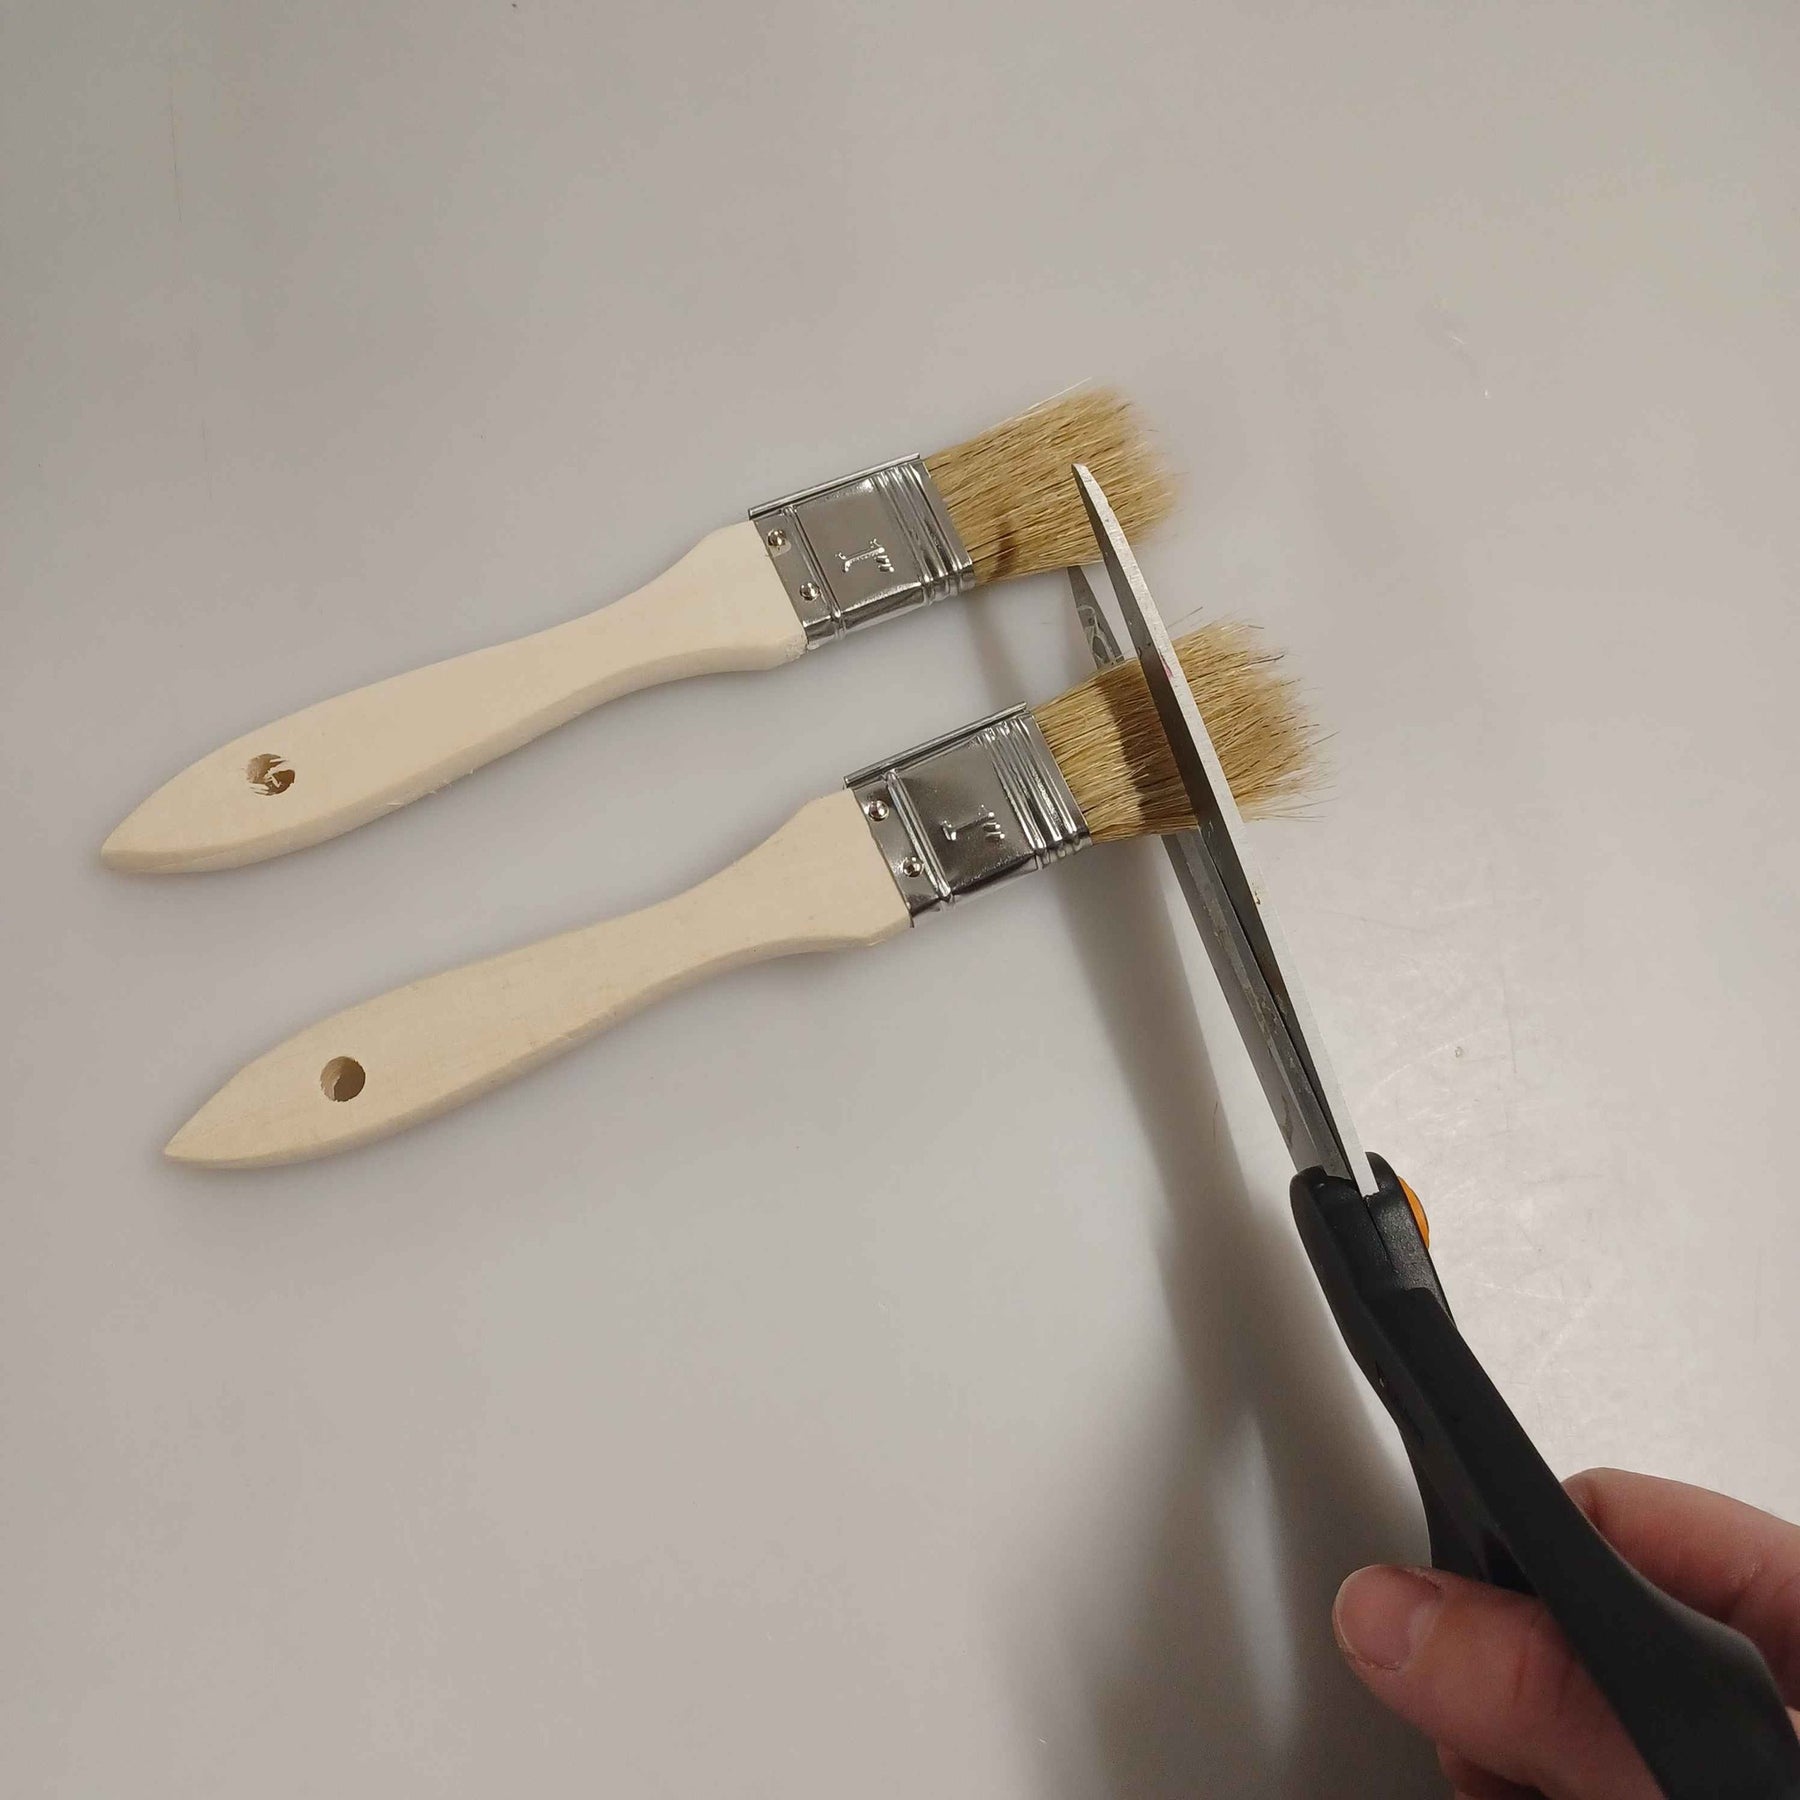 FAQ Friday #21 - I’m struggling to brush the glue as it’s thicker than I thought, so should I use a scraper or credit card?